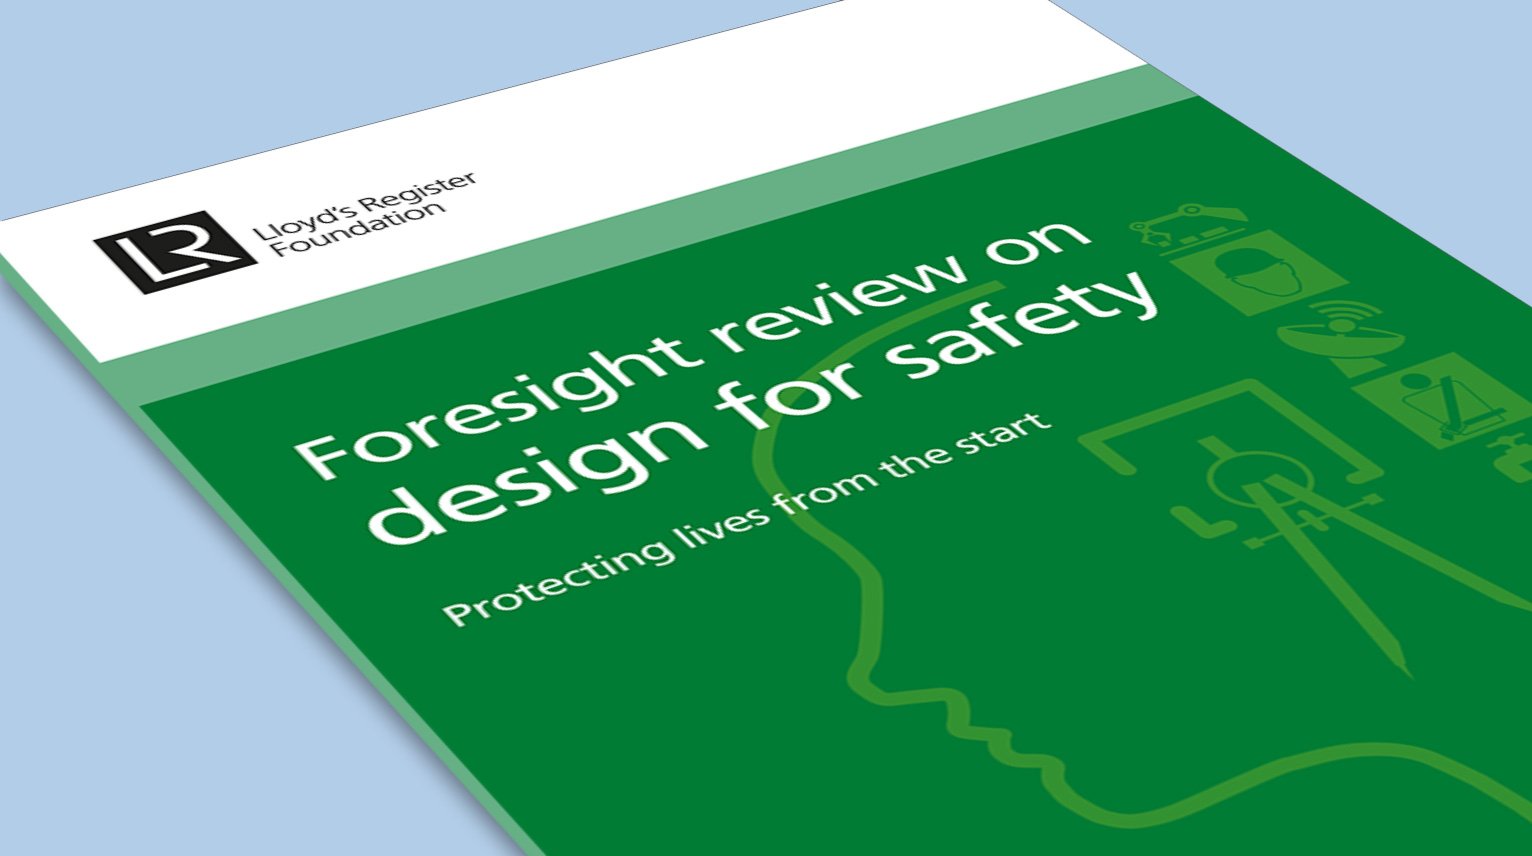 Foresight Review on Food Safety